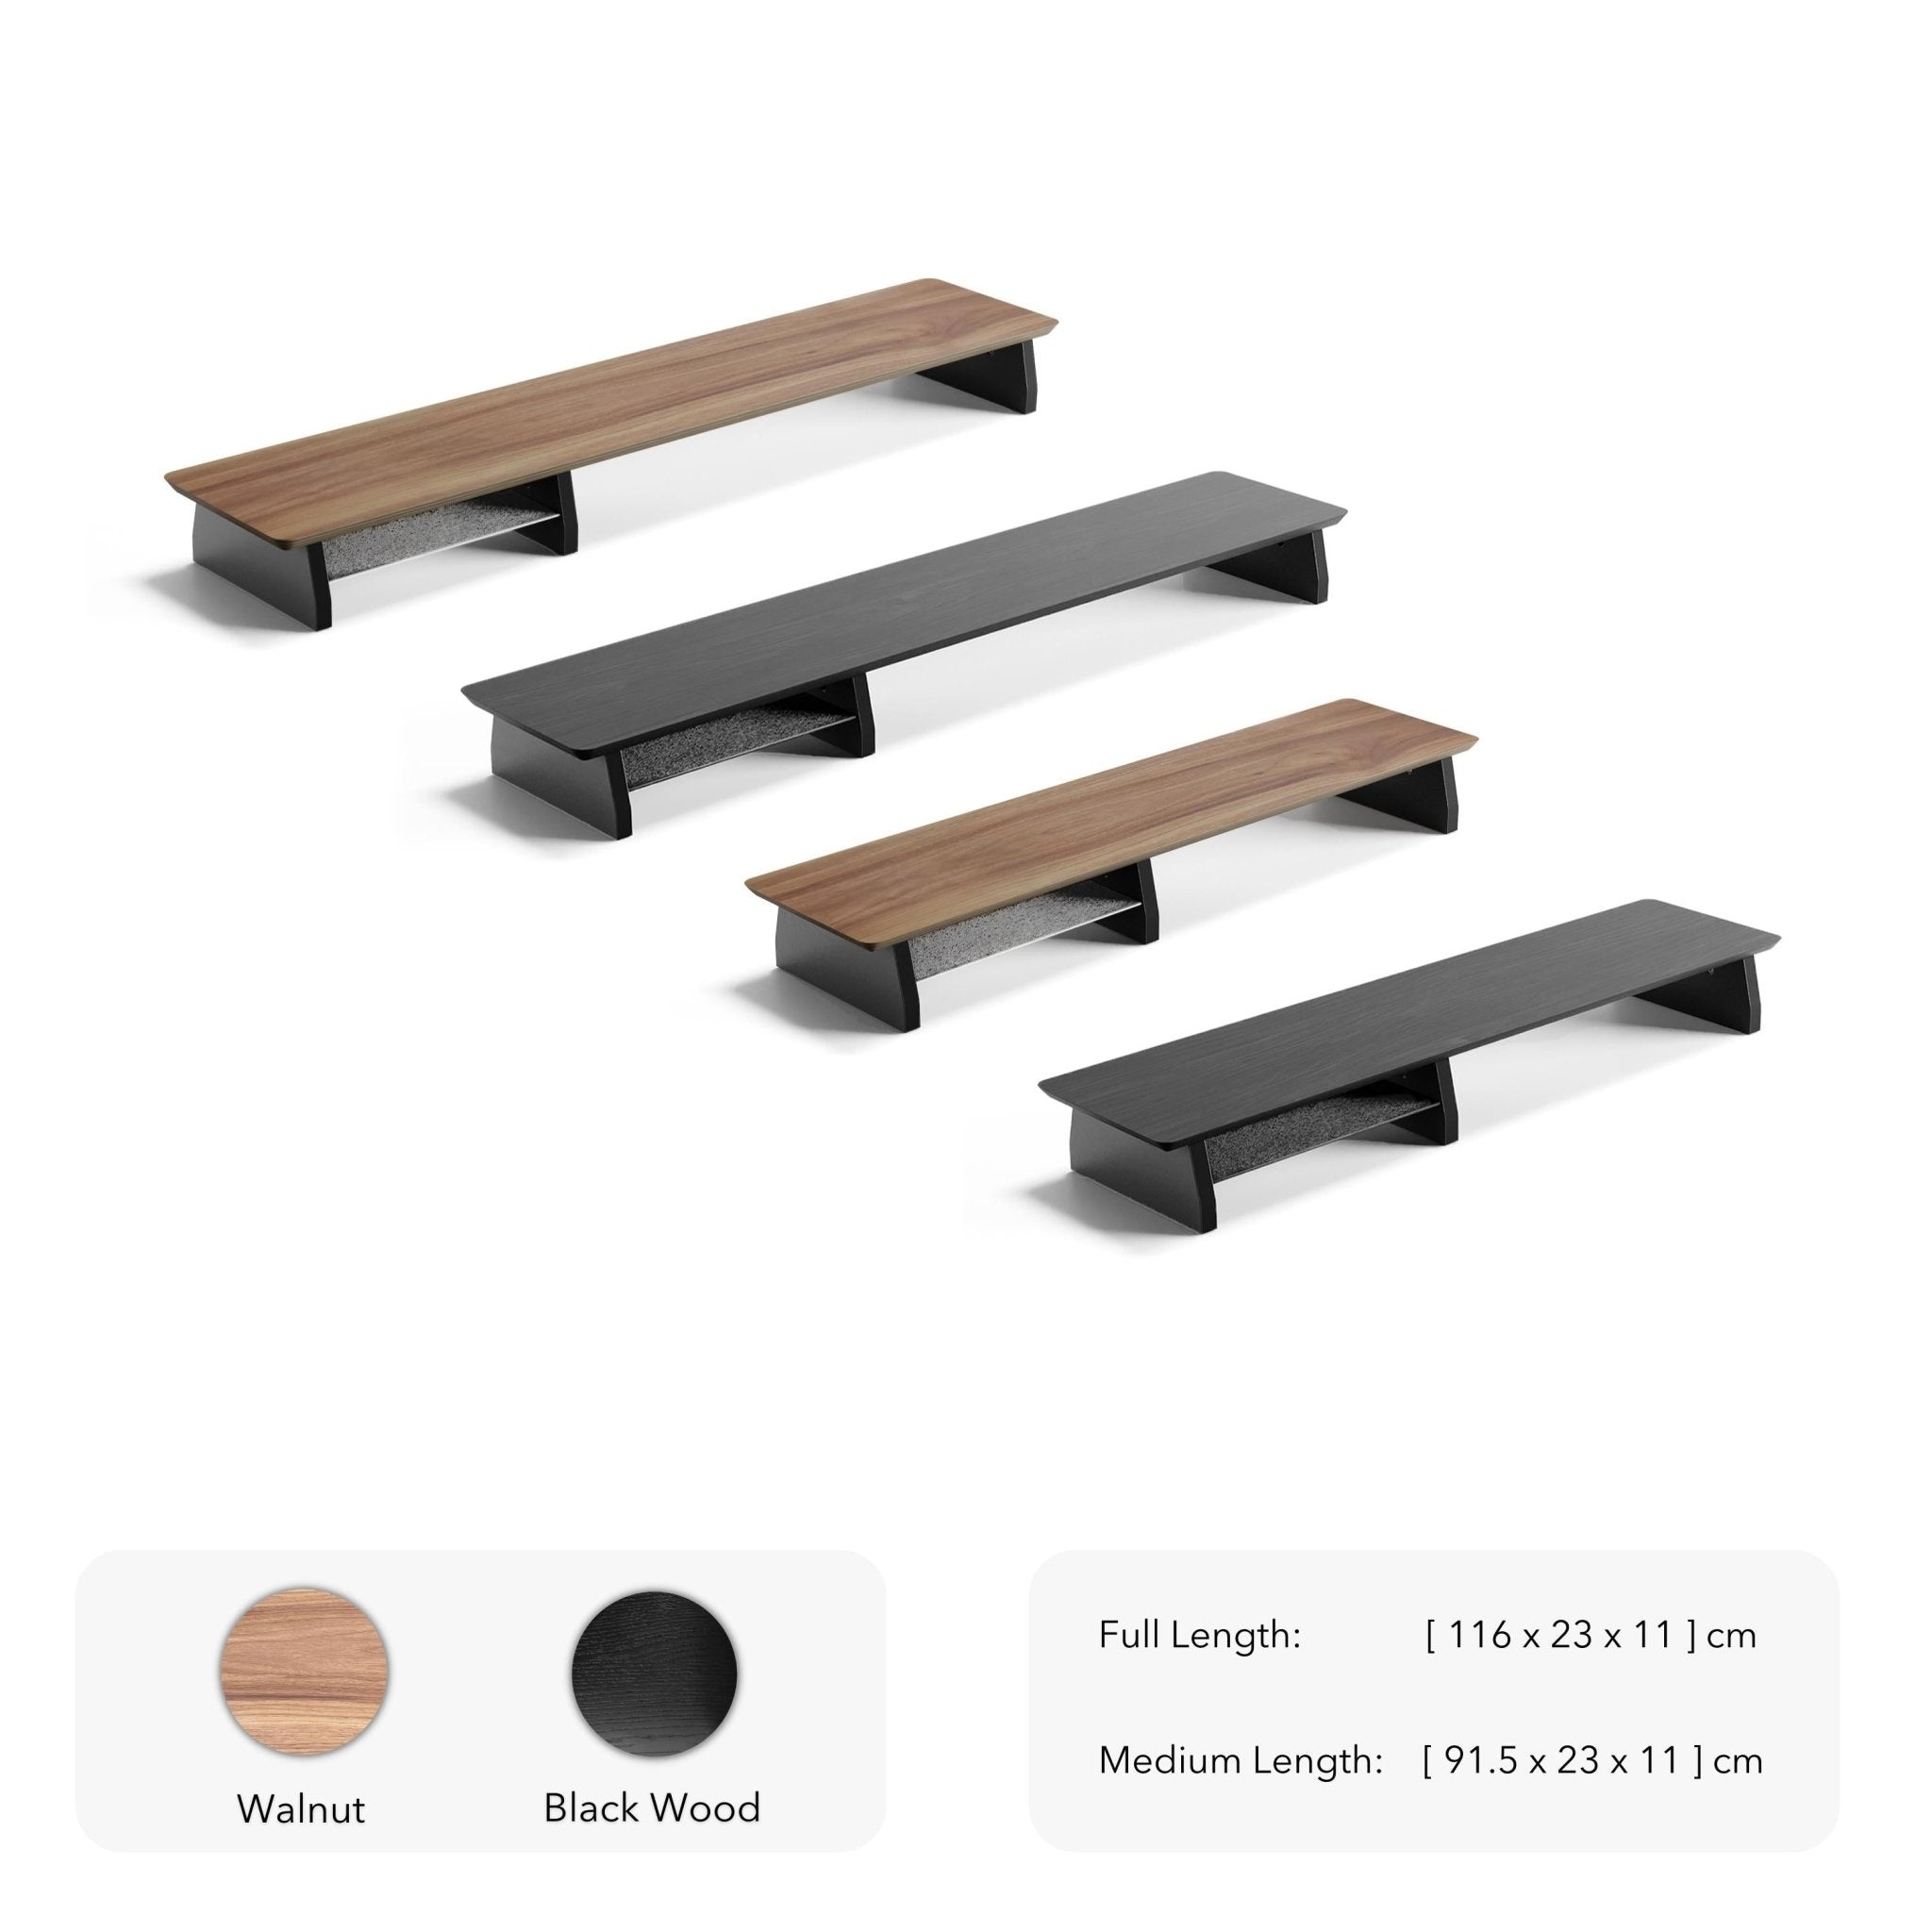 Raico desk shelf for monitor stand is available in 2 colours; walnut and black. Raico monitor stand also comes in 2 different sizes; Full length in 116 cm width and medium size 91.5 cm width